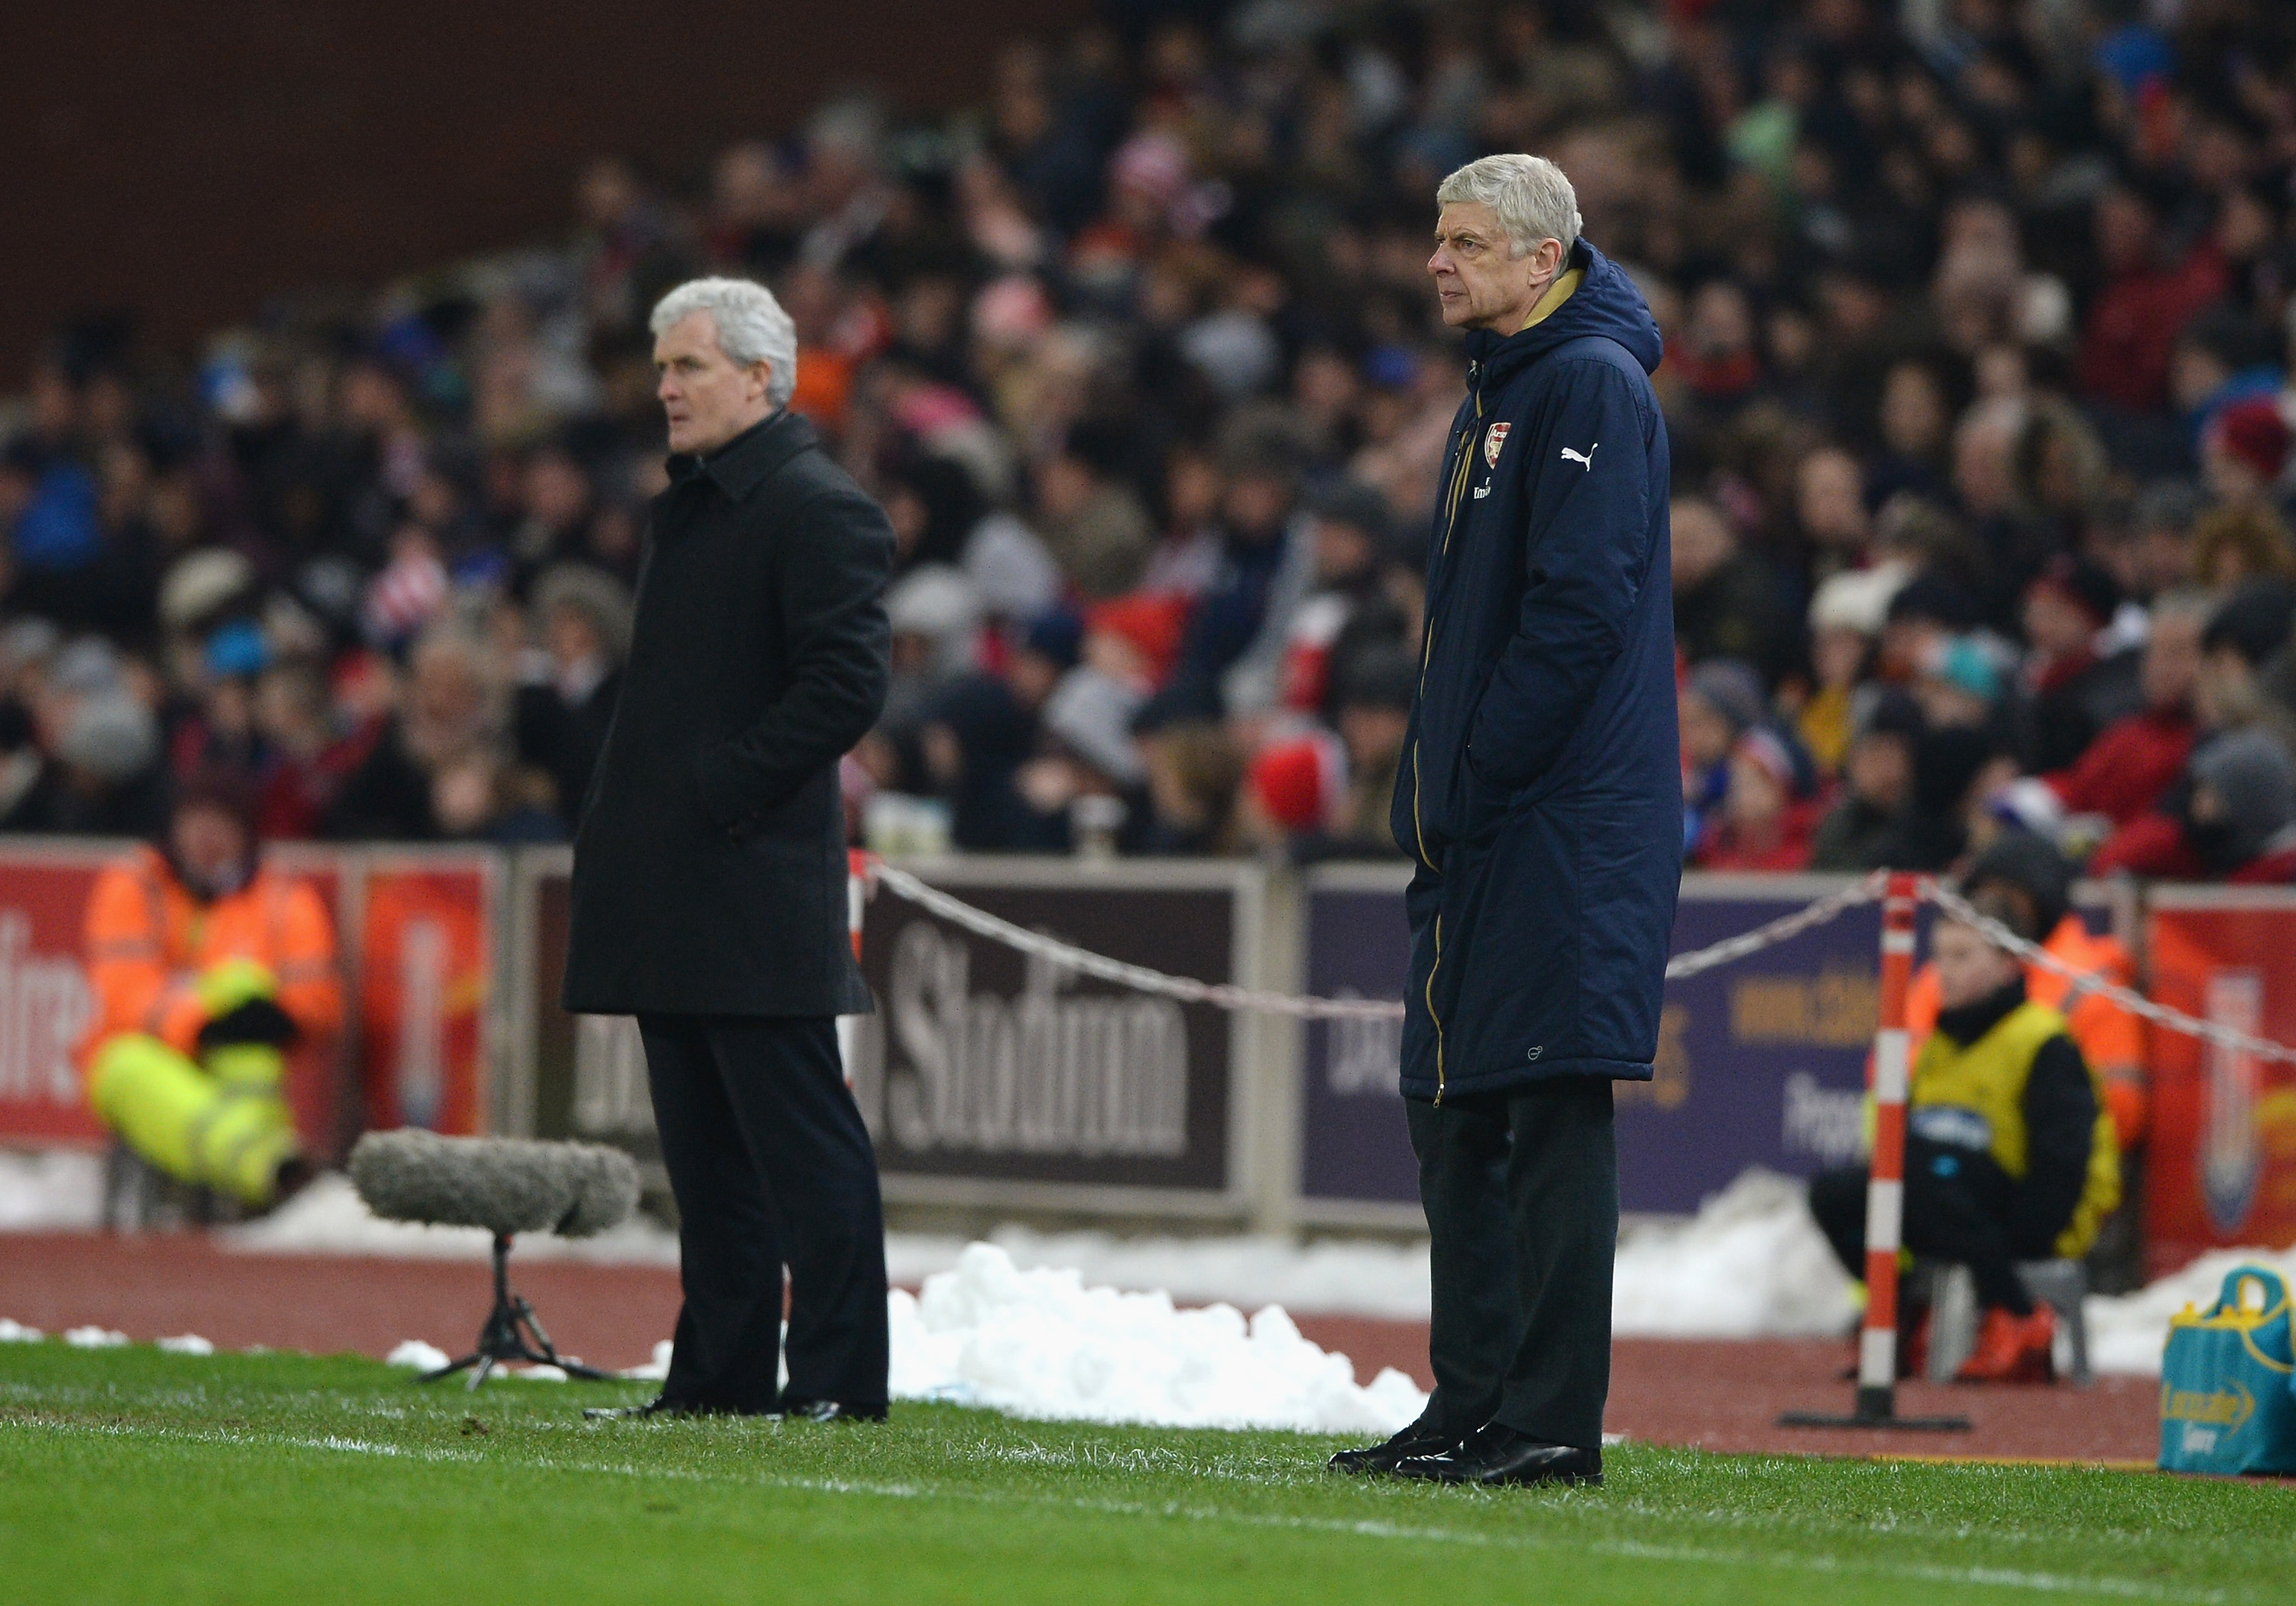 STOKE ON TRENT, ENGLAND - JANUARY 17:  Arsene Wenger, manager of Arsenal looks on with Mark Hughes, manager of Stoke City during the Barclays Premier League match between Stoke City and Arsenal at Britannia Stadium on January 17, 2016 in Stoke on Trent, England.  (Photo by Gareth Copley/Getty Images)